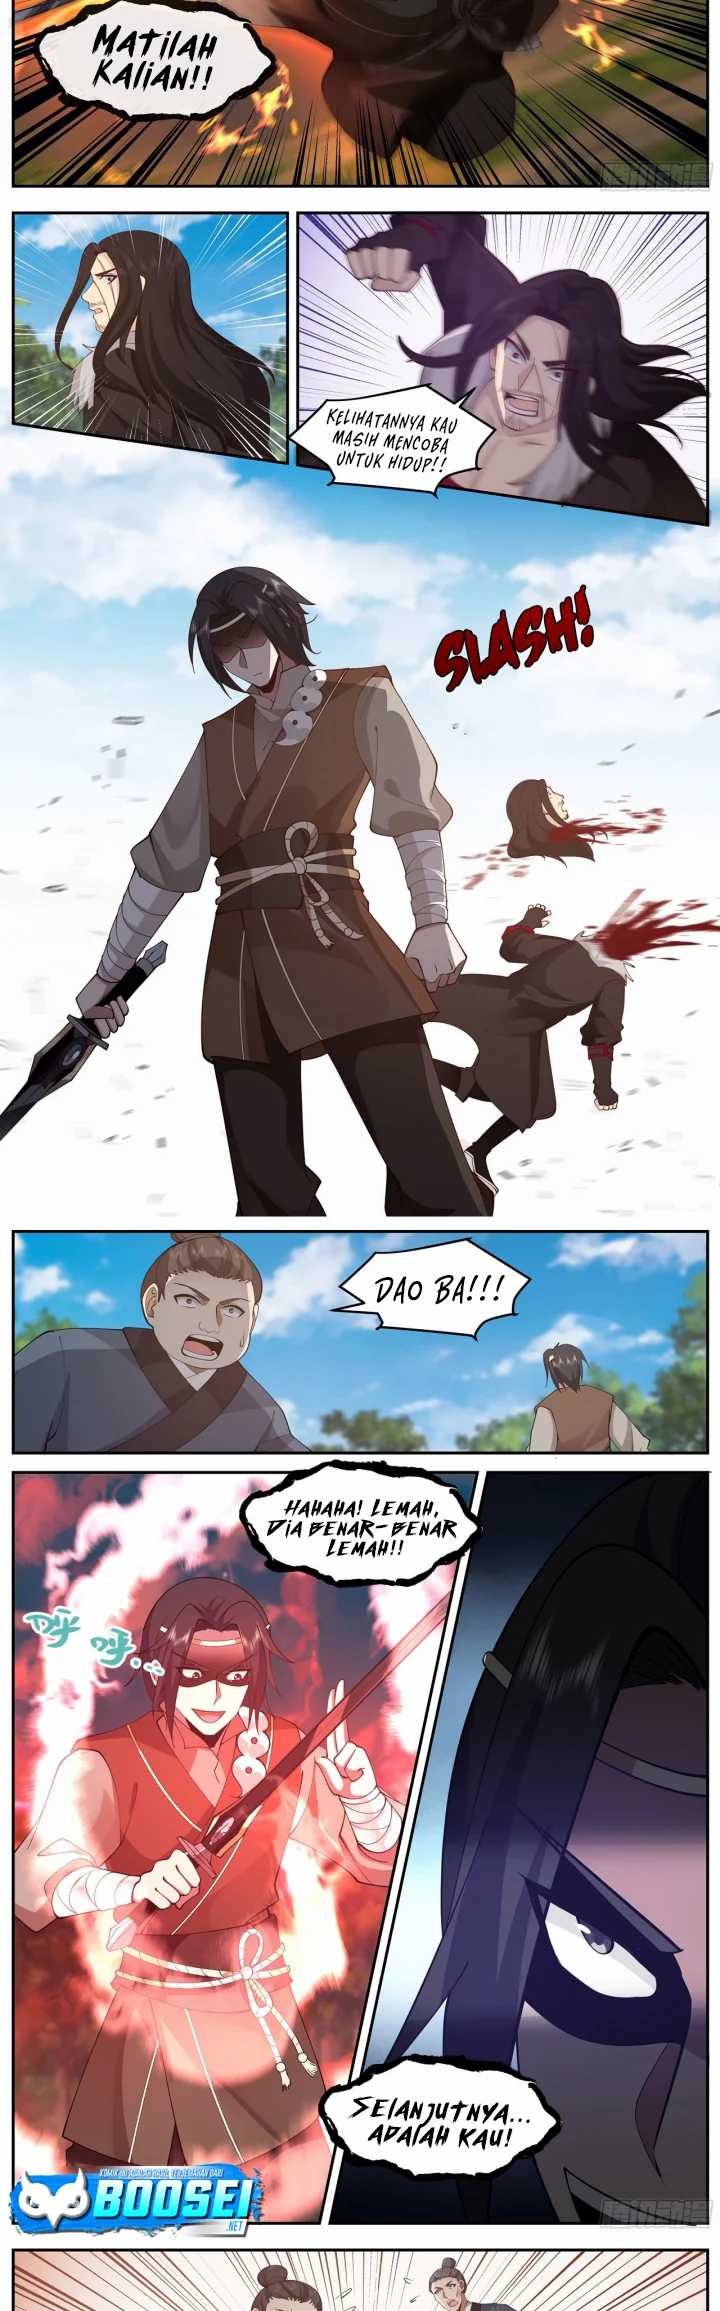 A Sword’s Evolution Begins From Killing Chapter 13